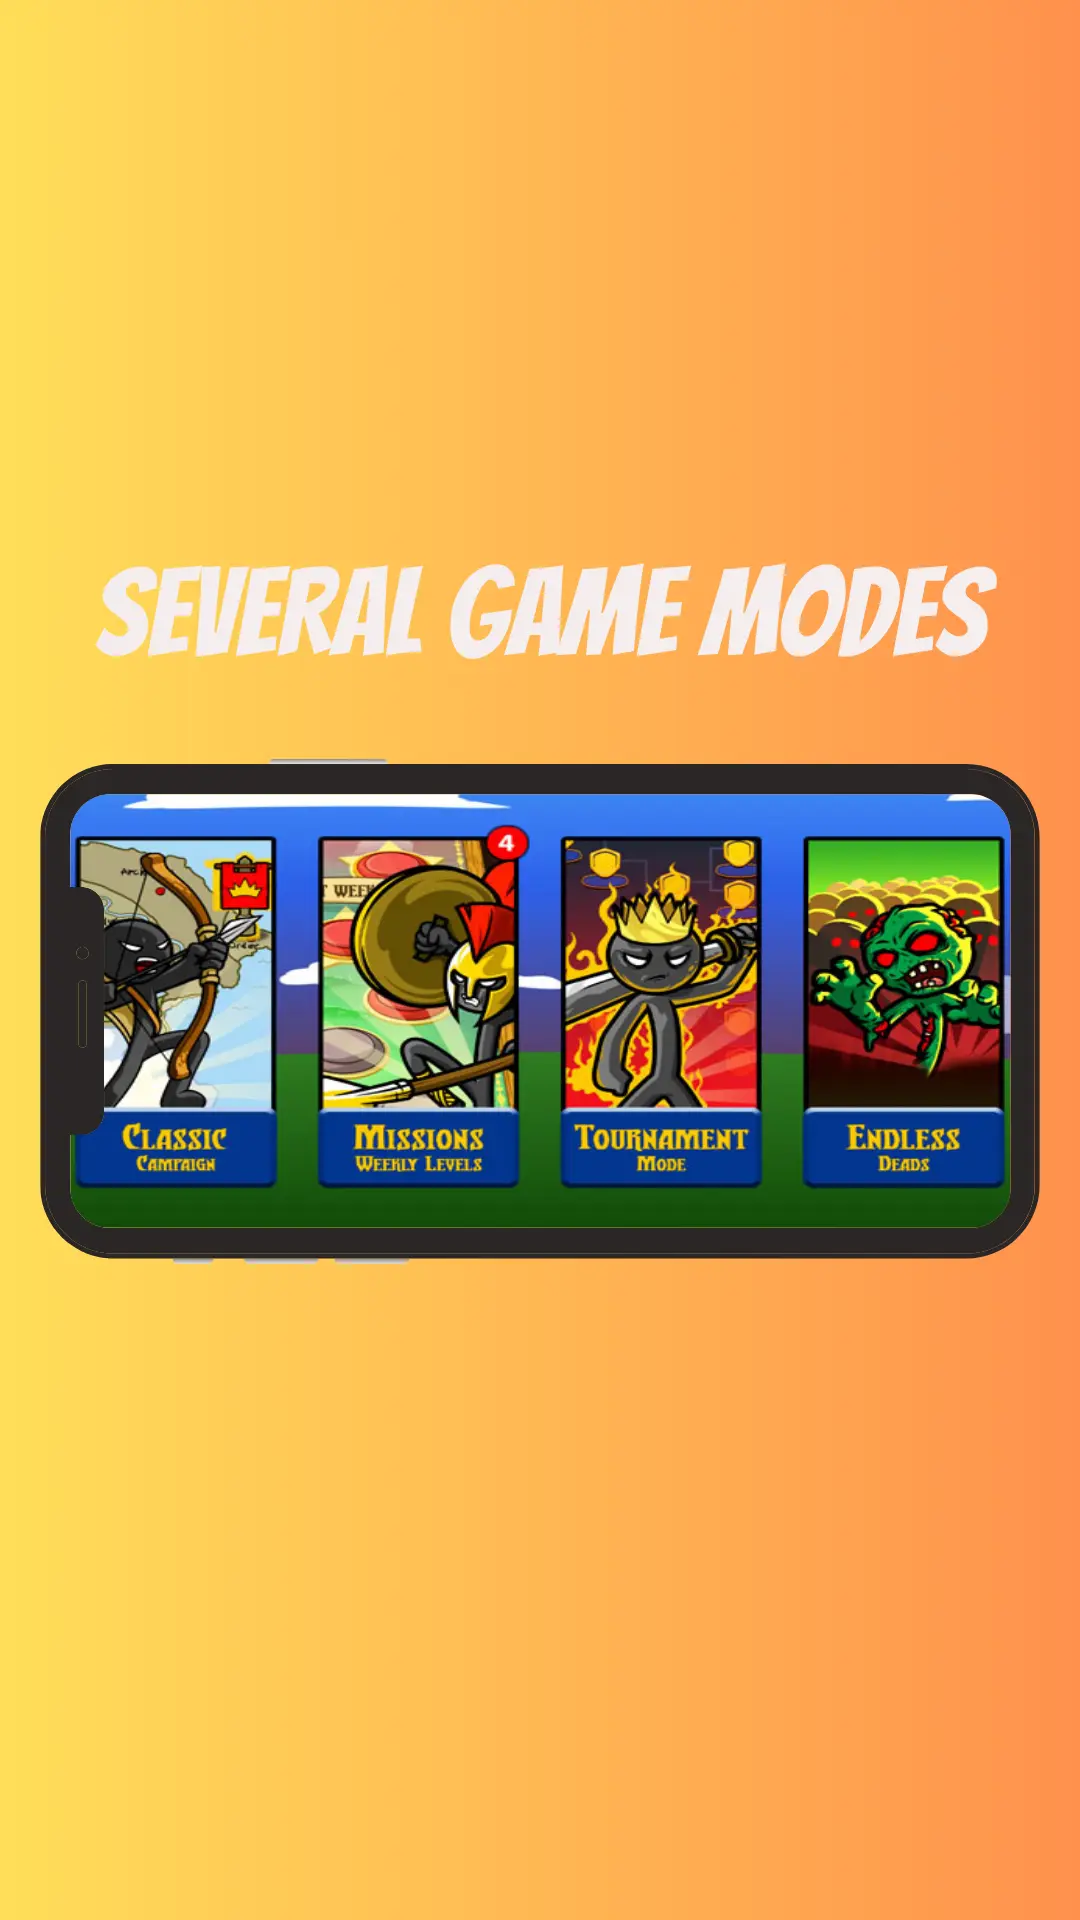 SEVERAL GAME MODES